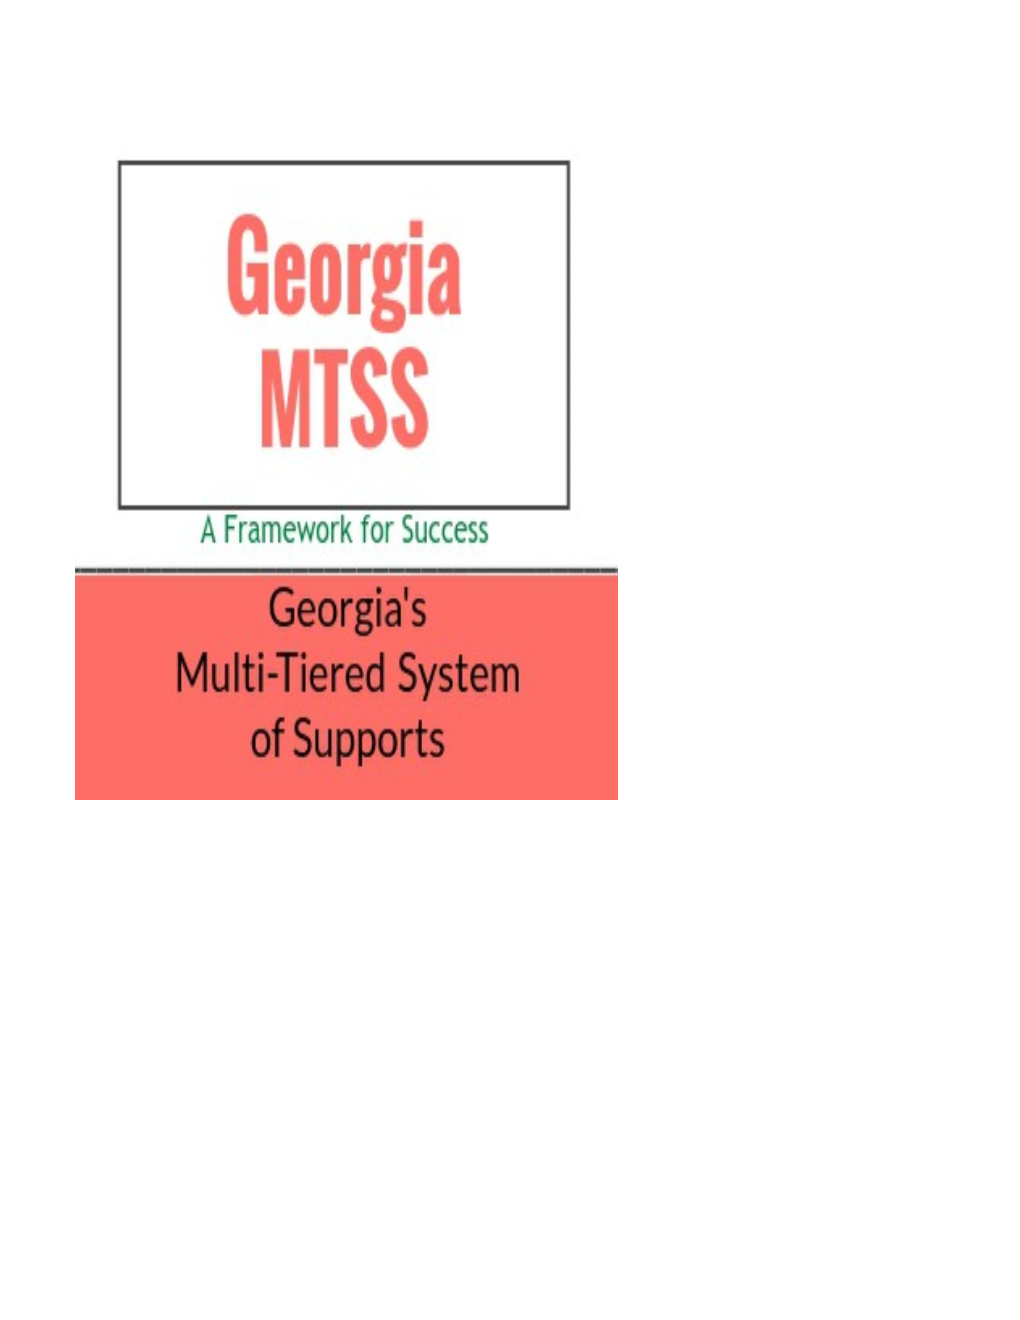 Application to Participate in Georgia MTSS